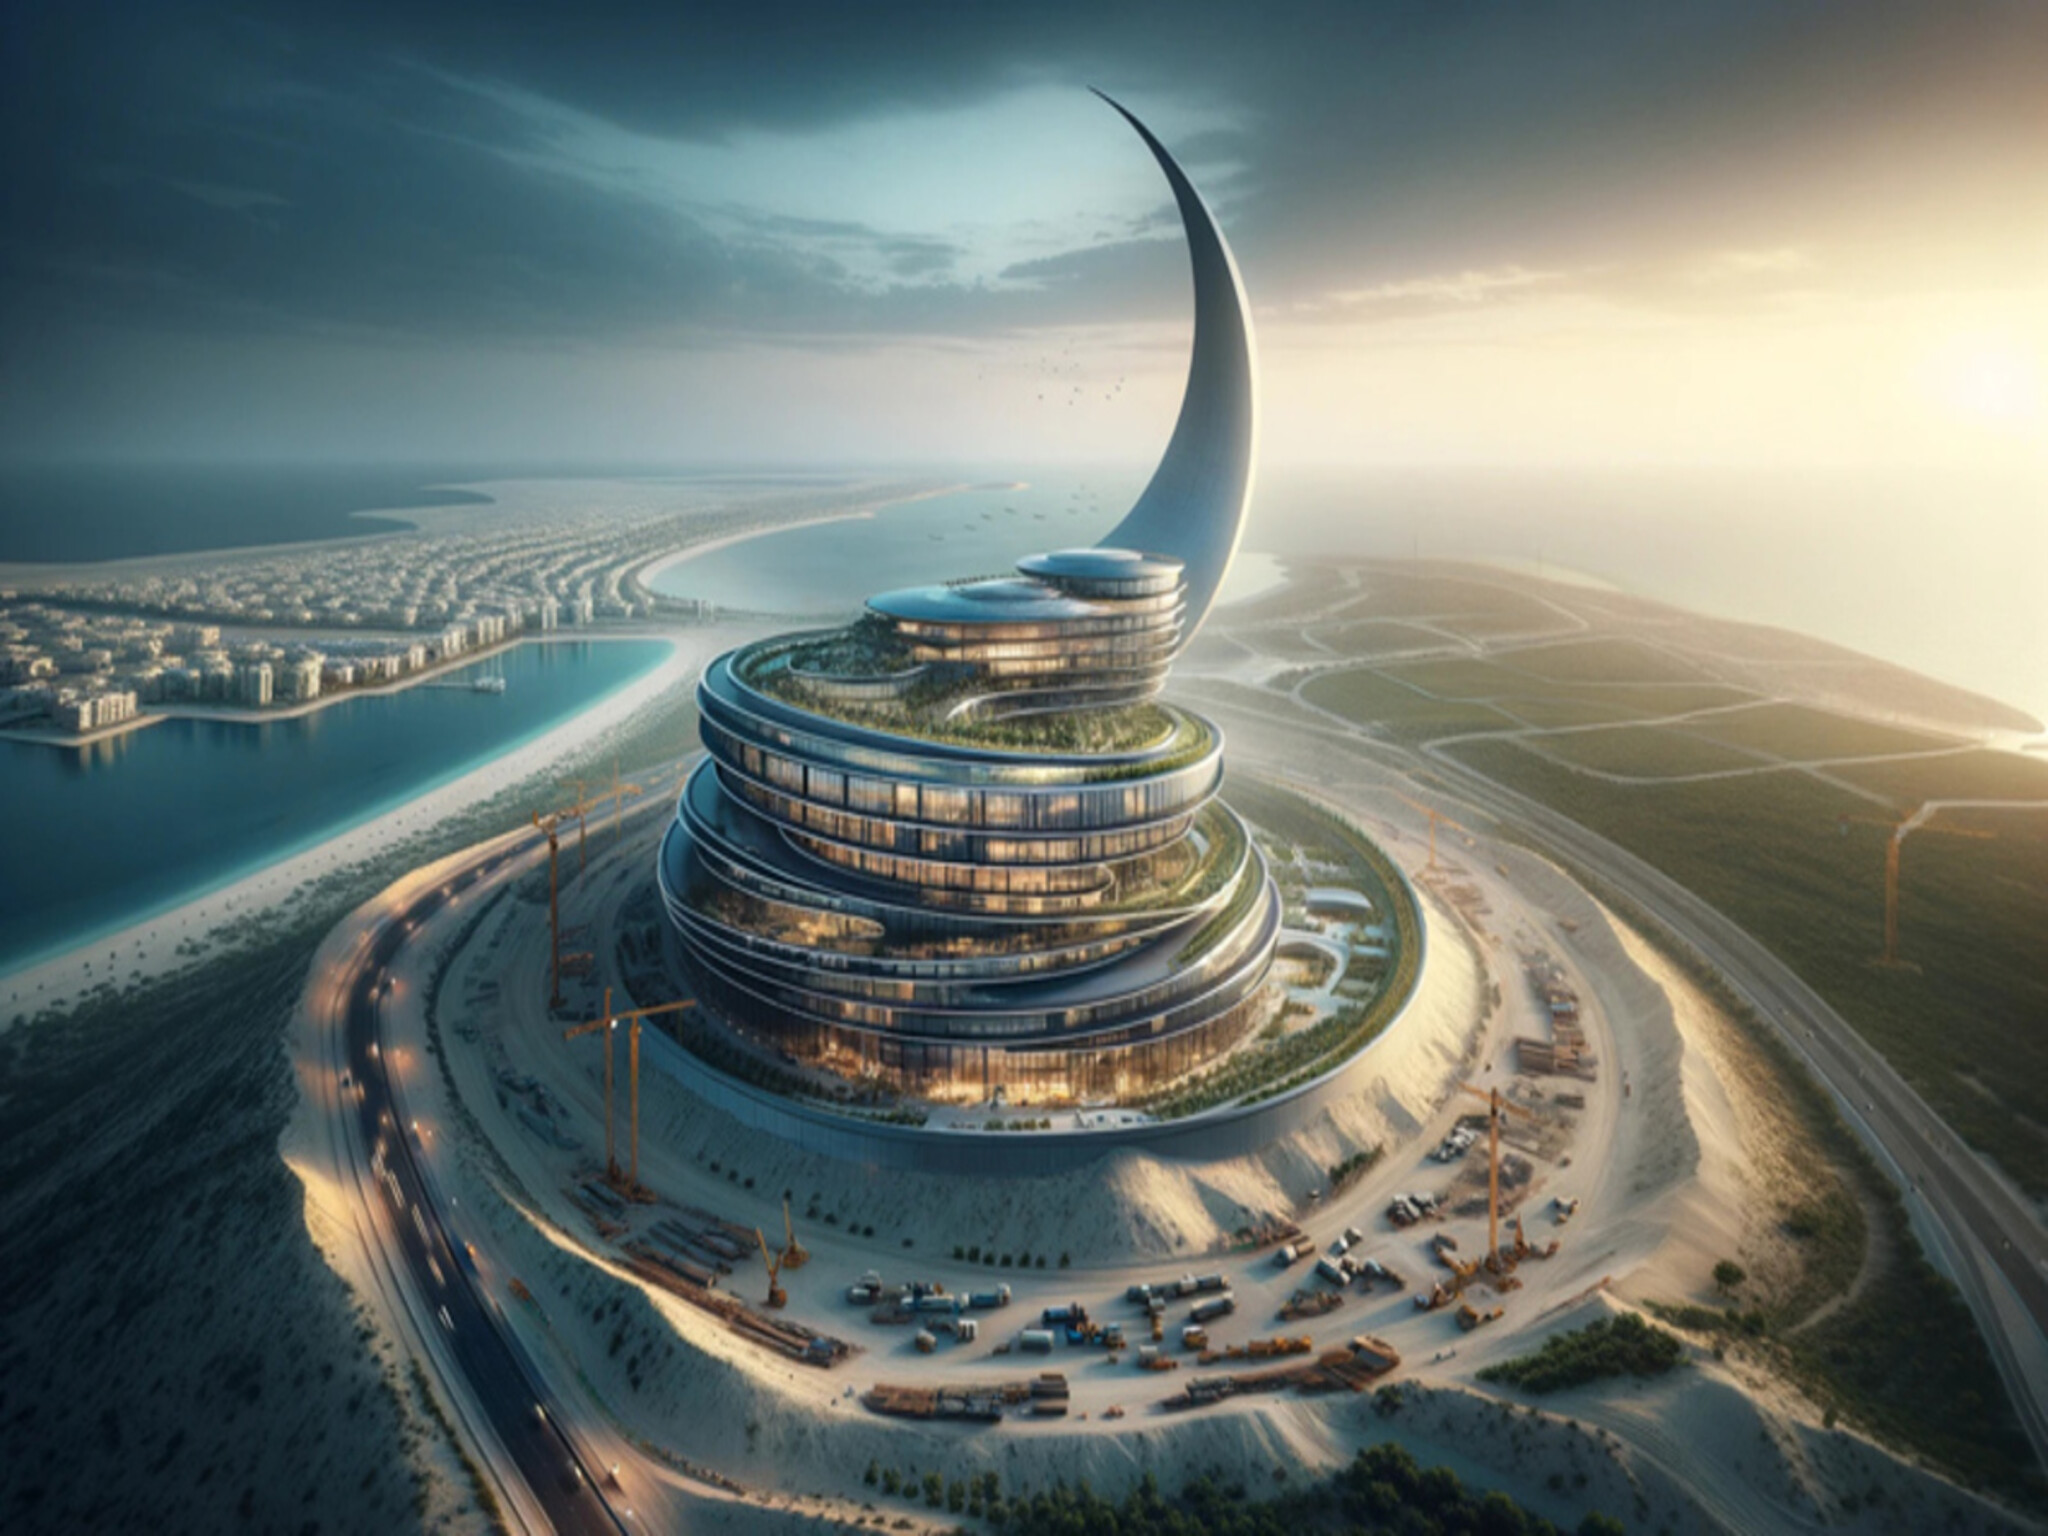 UAE to launch new moon-shaped project rising "above the clouds" in Sharjah